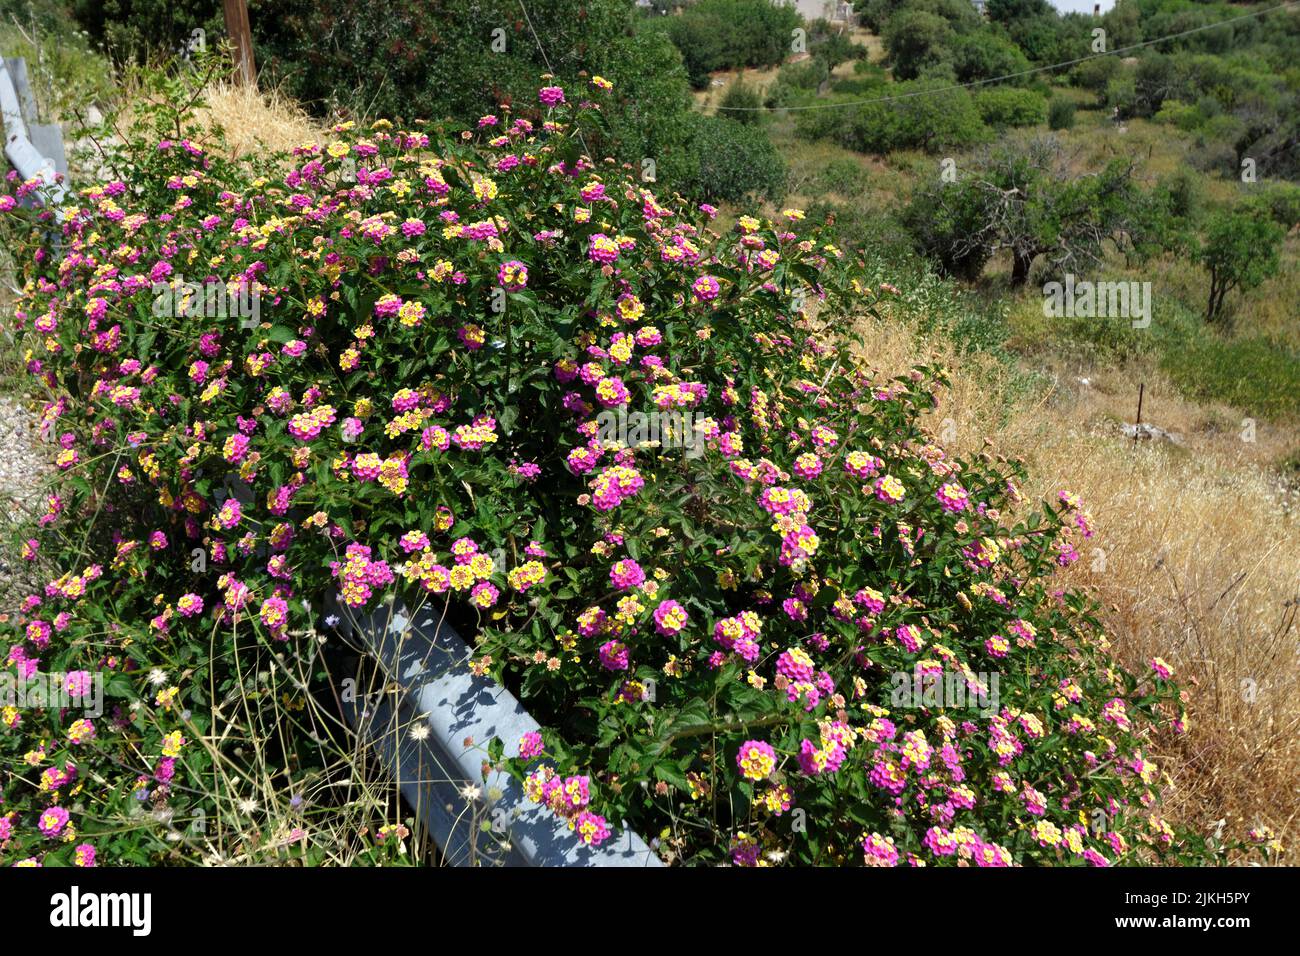 Plants at side of road, Livadia, Tilos, Dodecanese Islands, Southern Aegean, Greece. Stock Photo